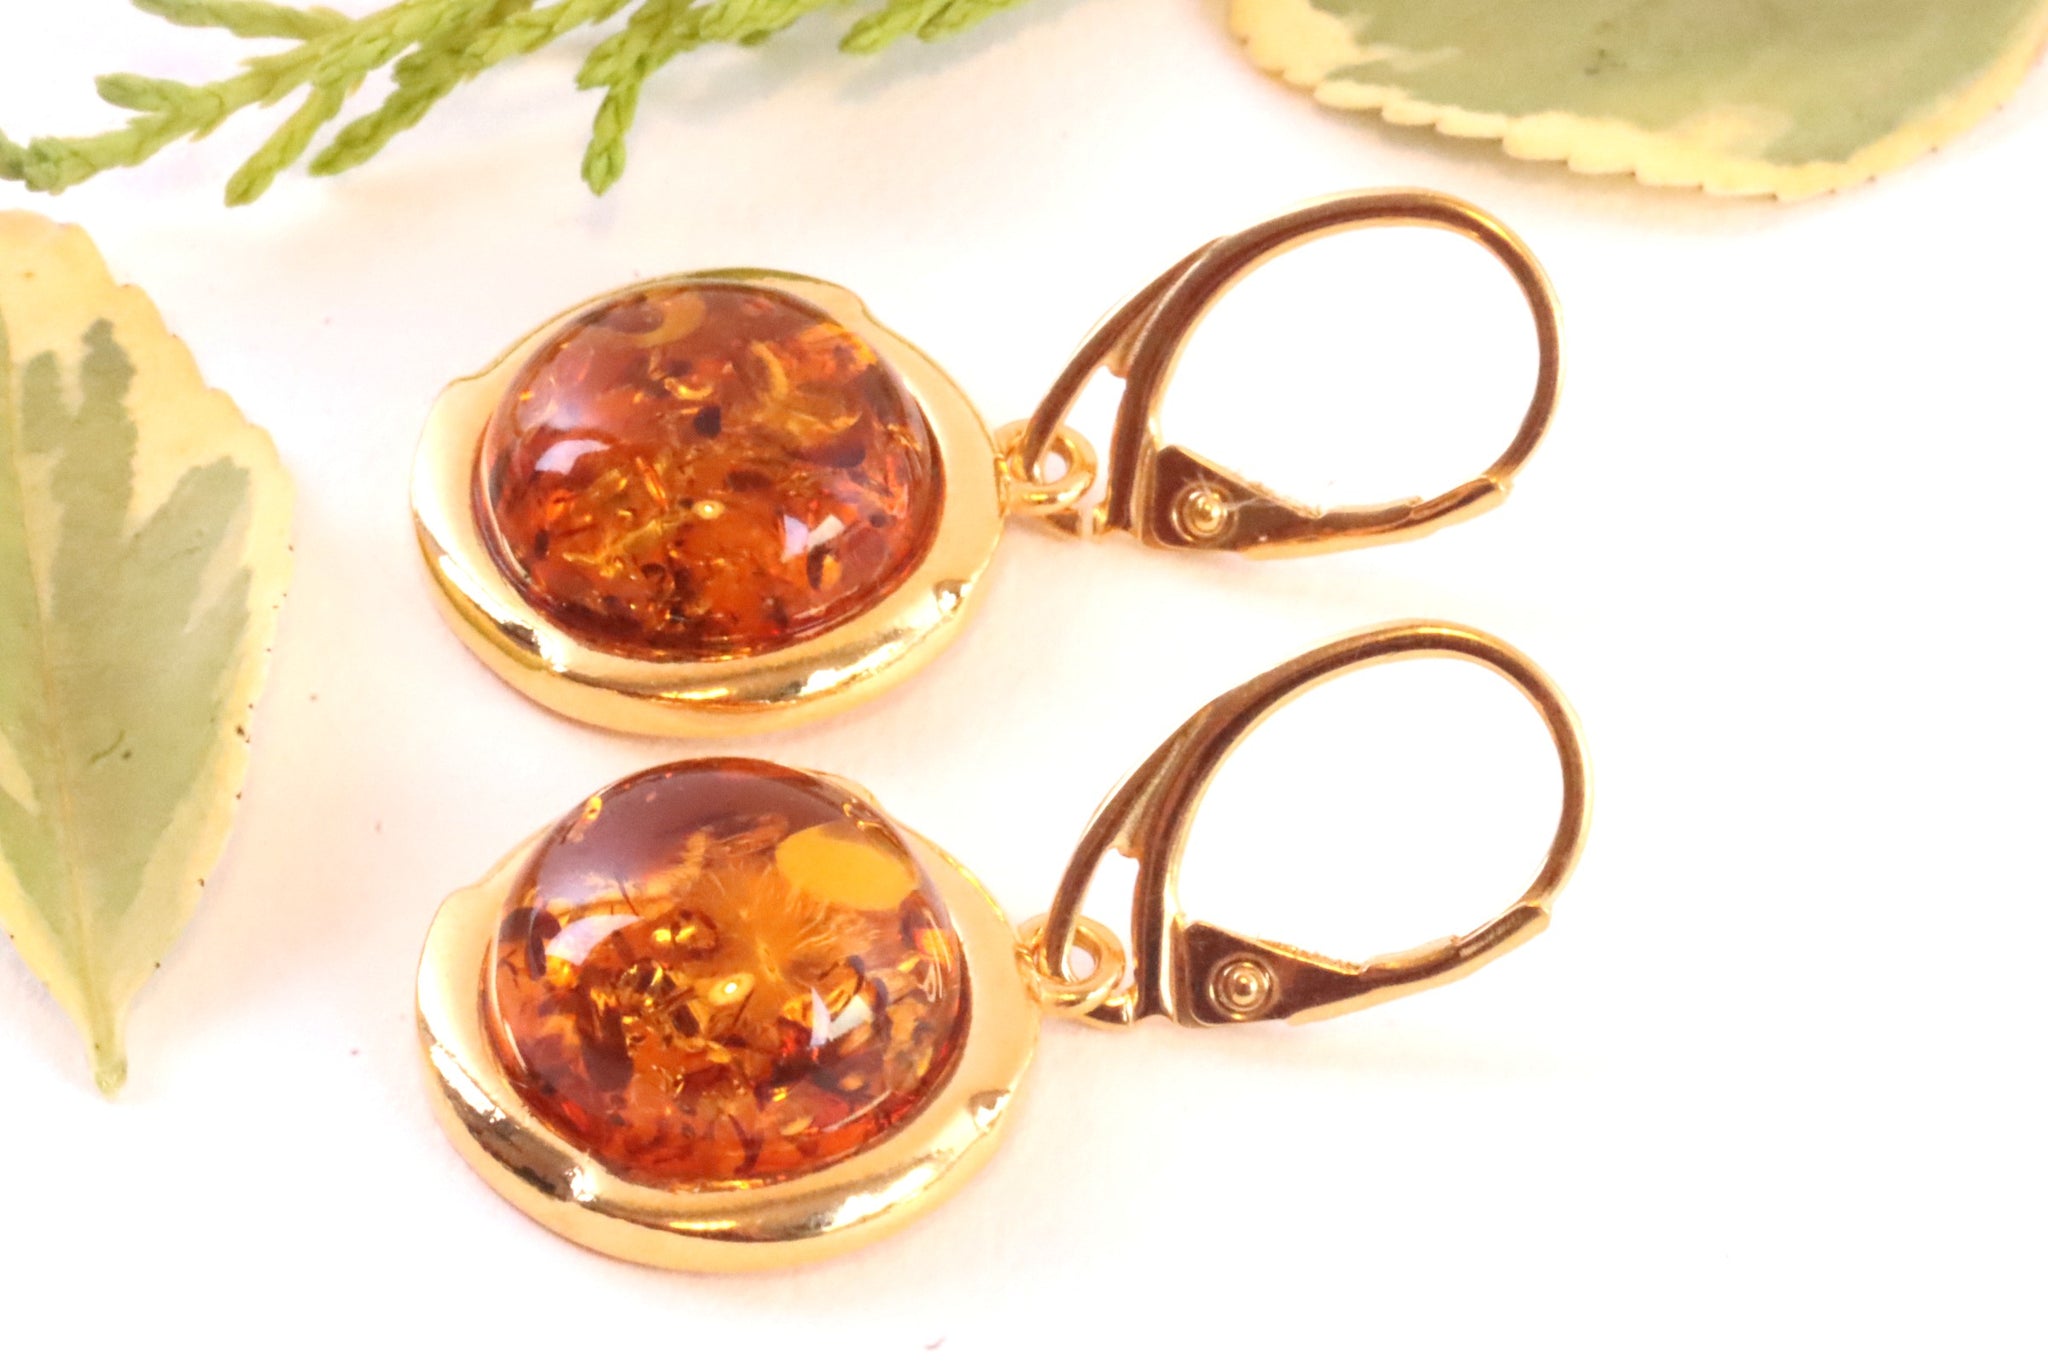 Gold Plated Sterling Silver Baltic Amber Earrings